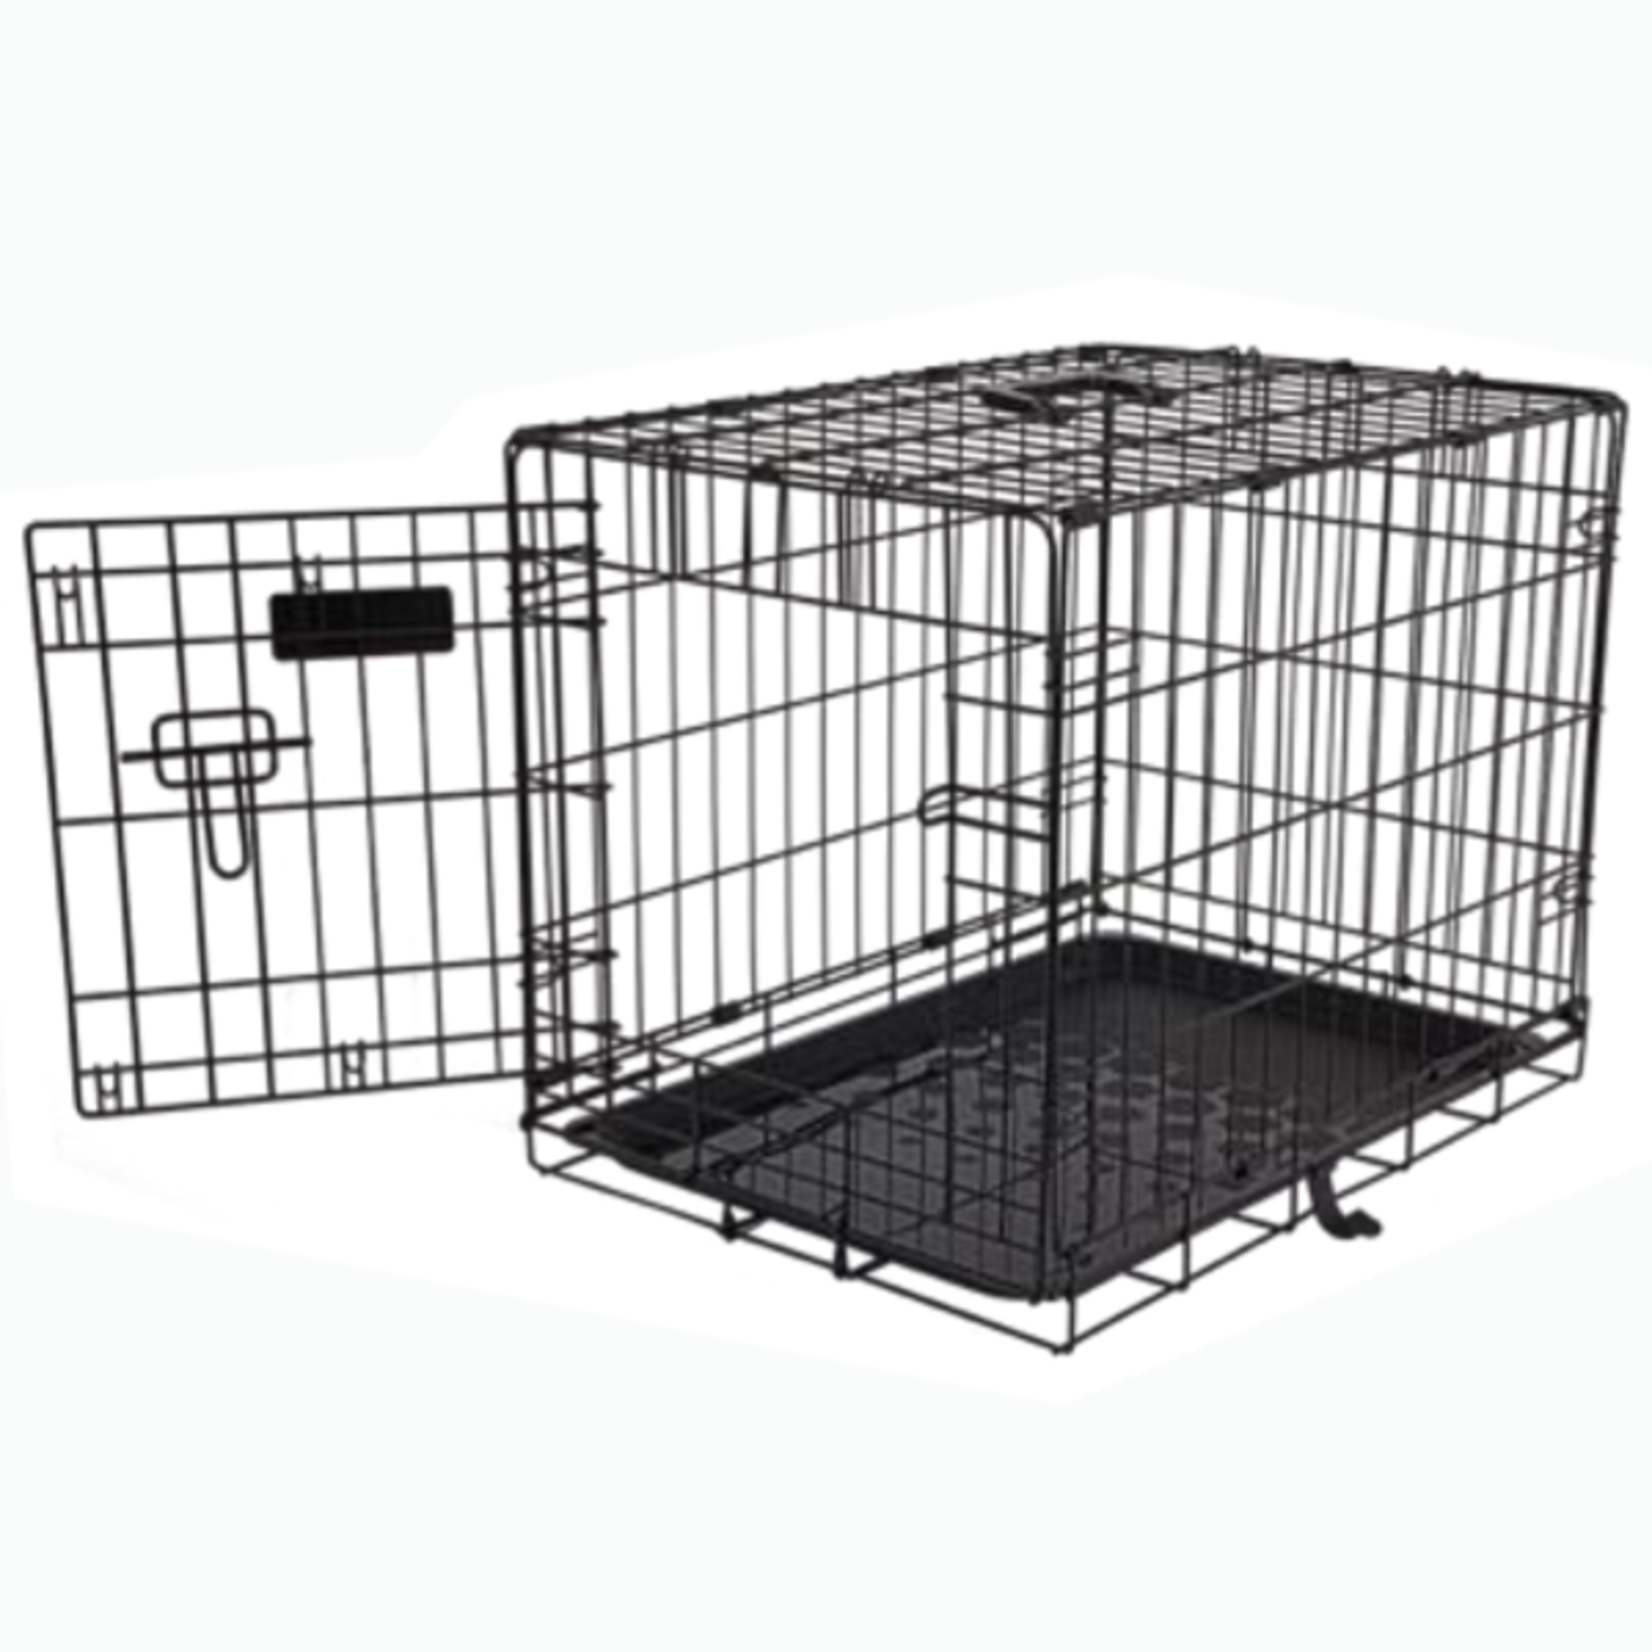 Valu Paws Precision ValuPaws Housetraining Wire Crate 54"x32.5"x34.7"